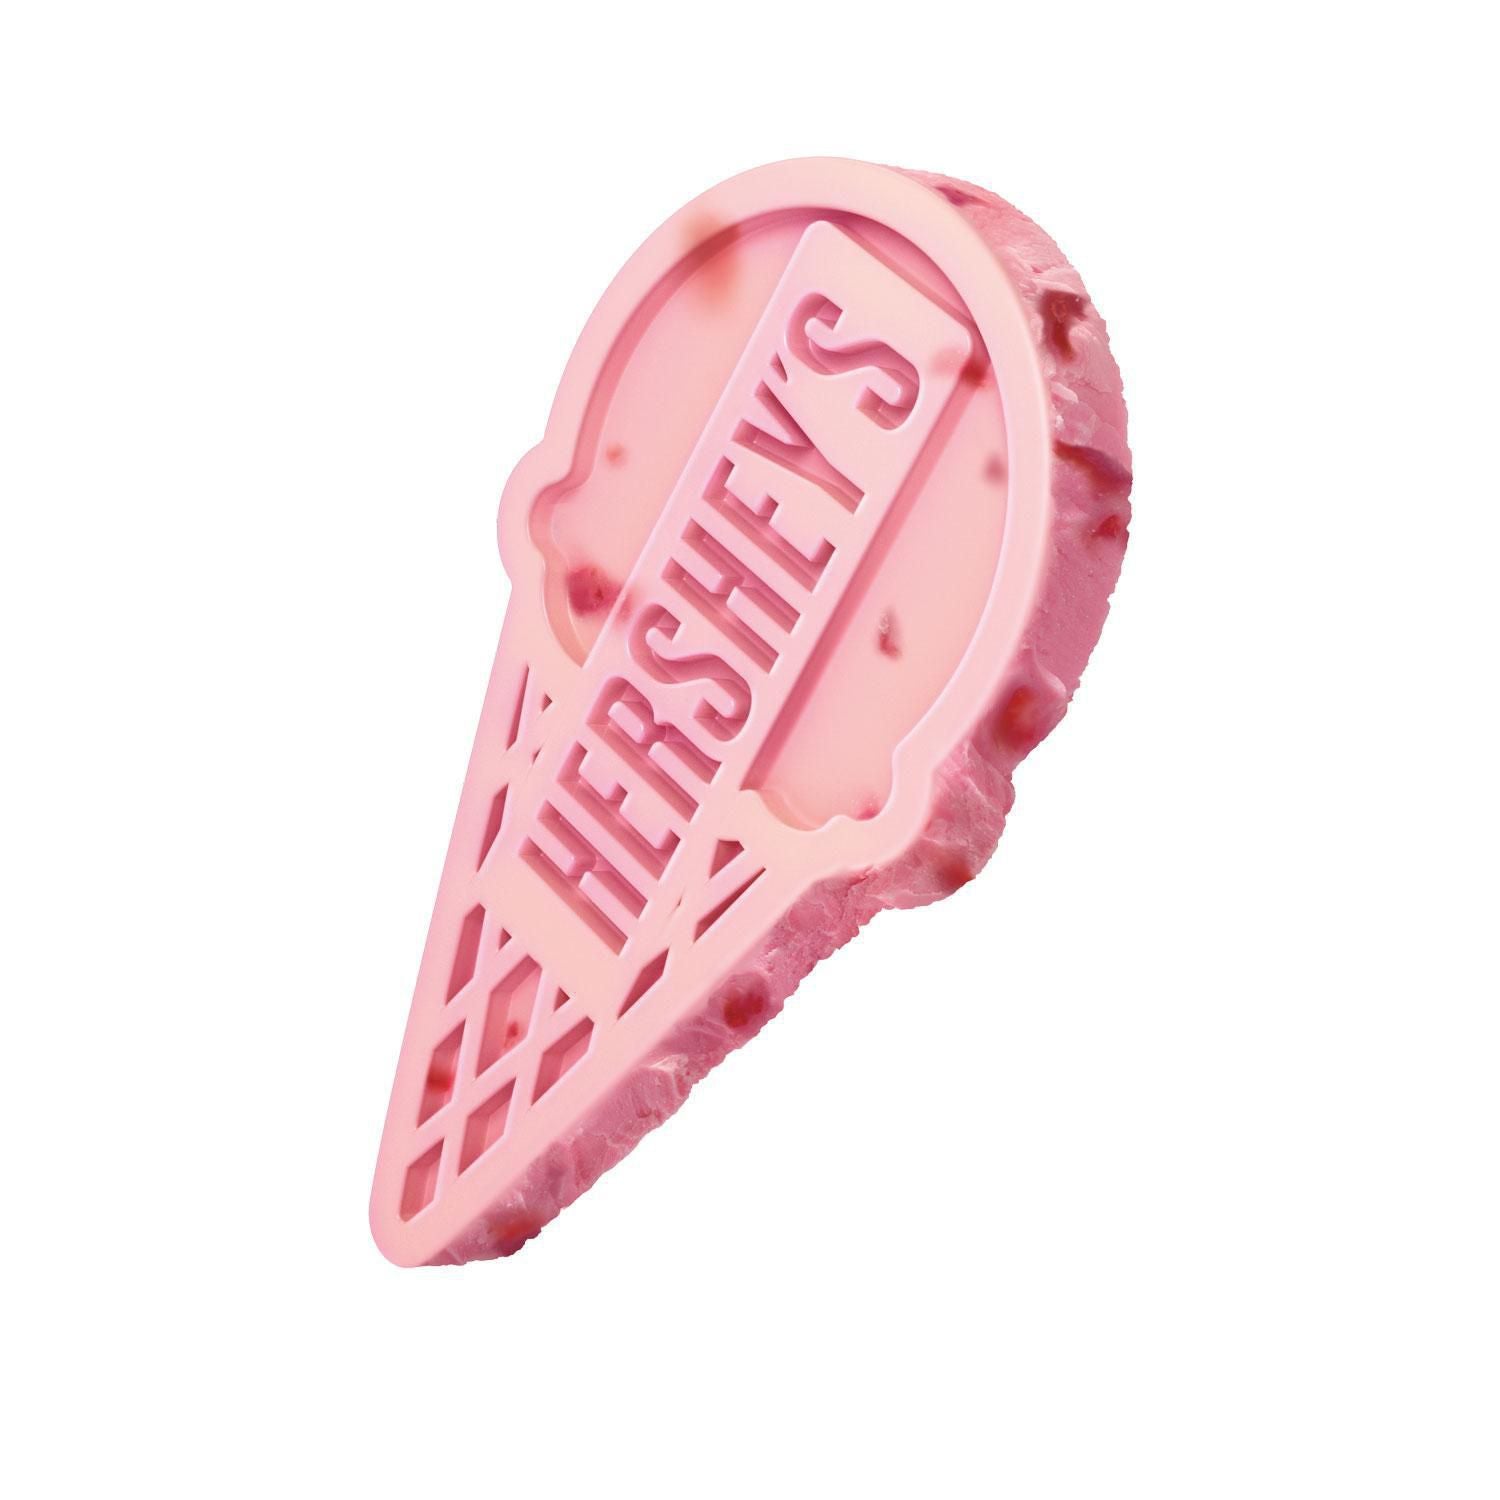 Hershey's Strawberries 'n' Creme Candy Bar - Sparty Girl